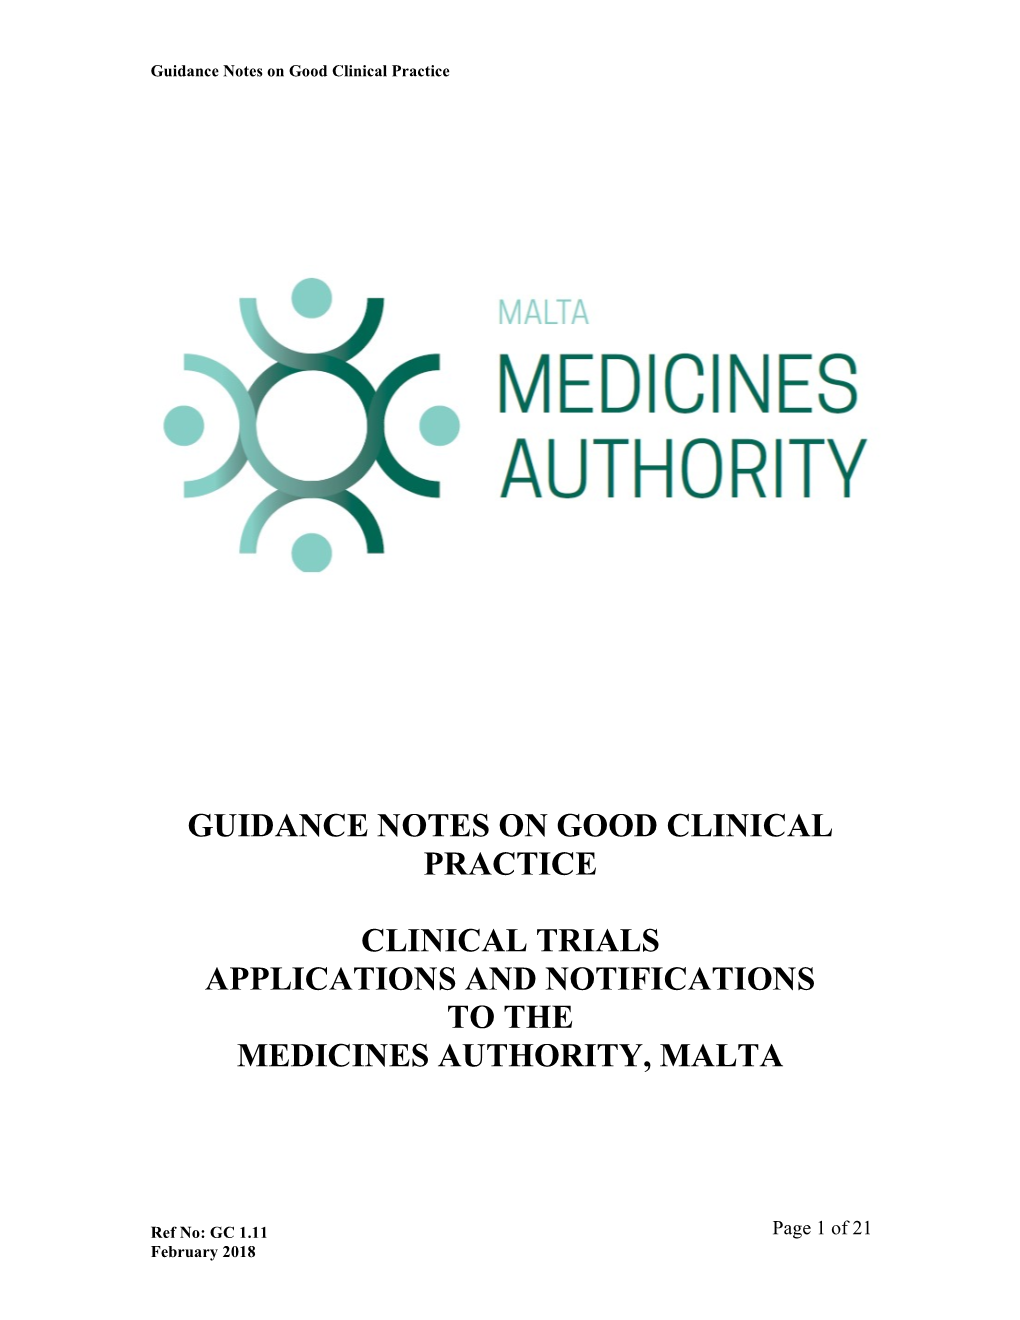 Guidance Notes on Good Clinical Practice Clinical